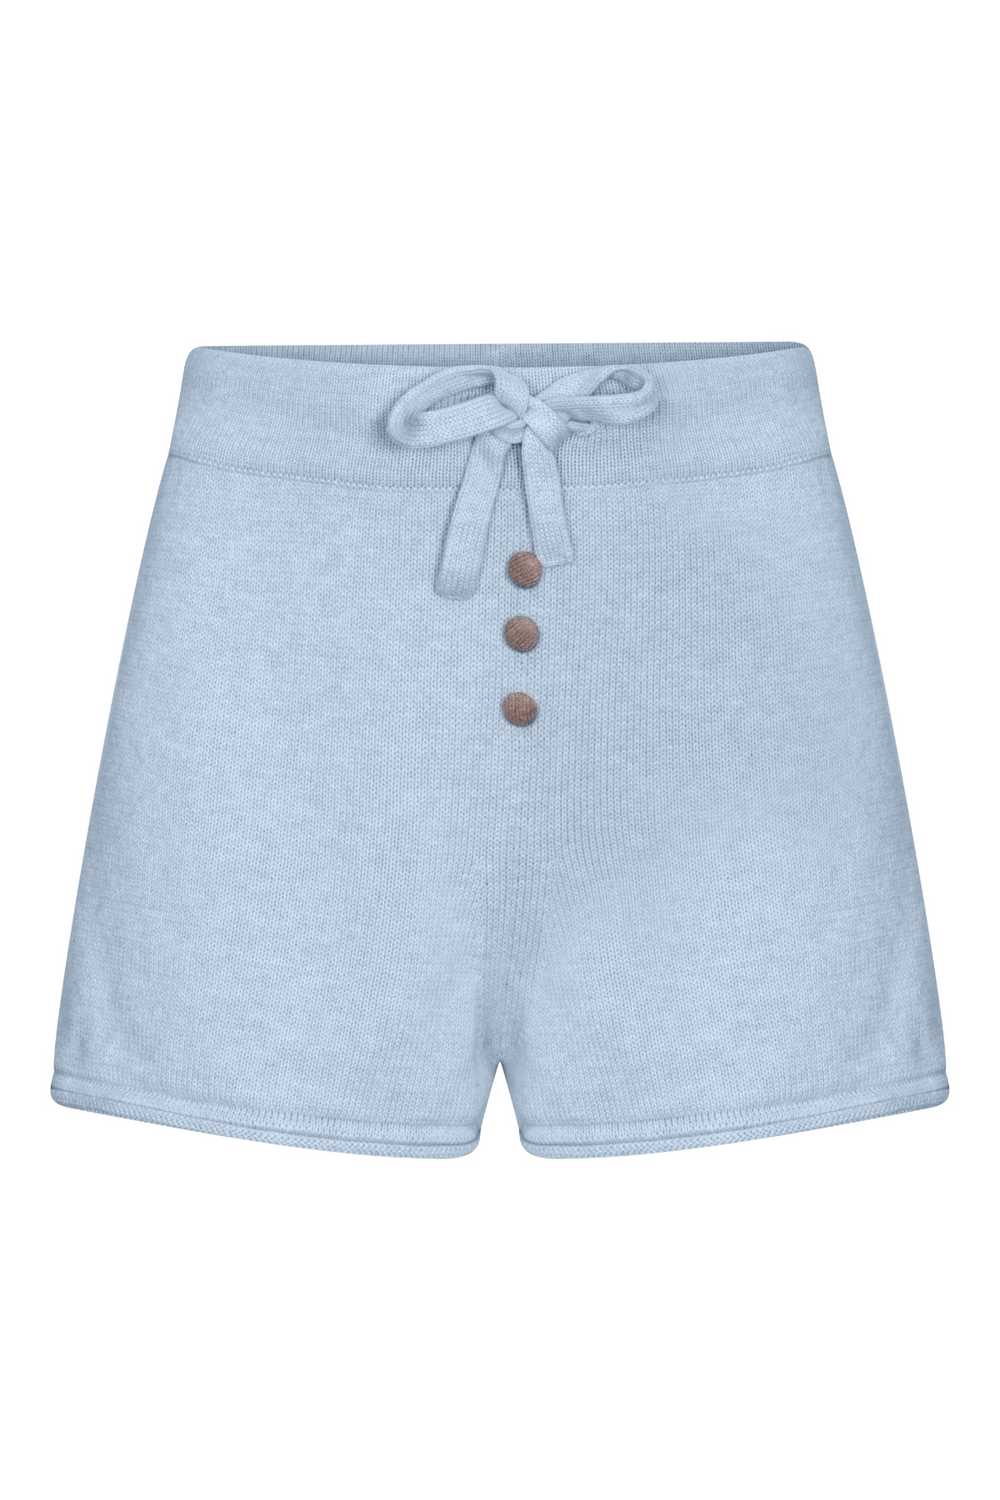 Baby Blue Knitted Shorts - noemotions-store